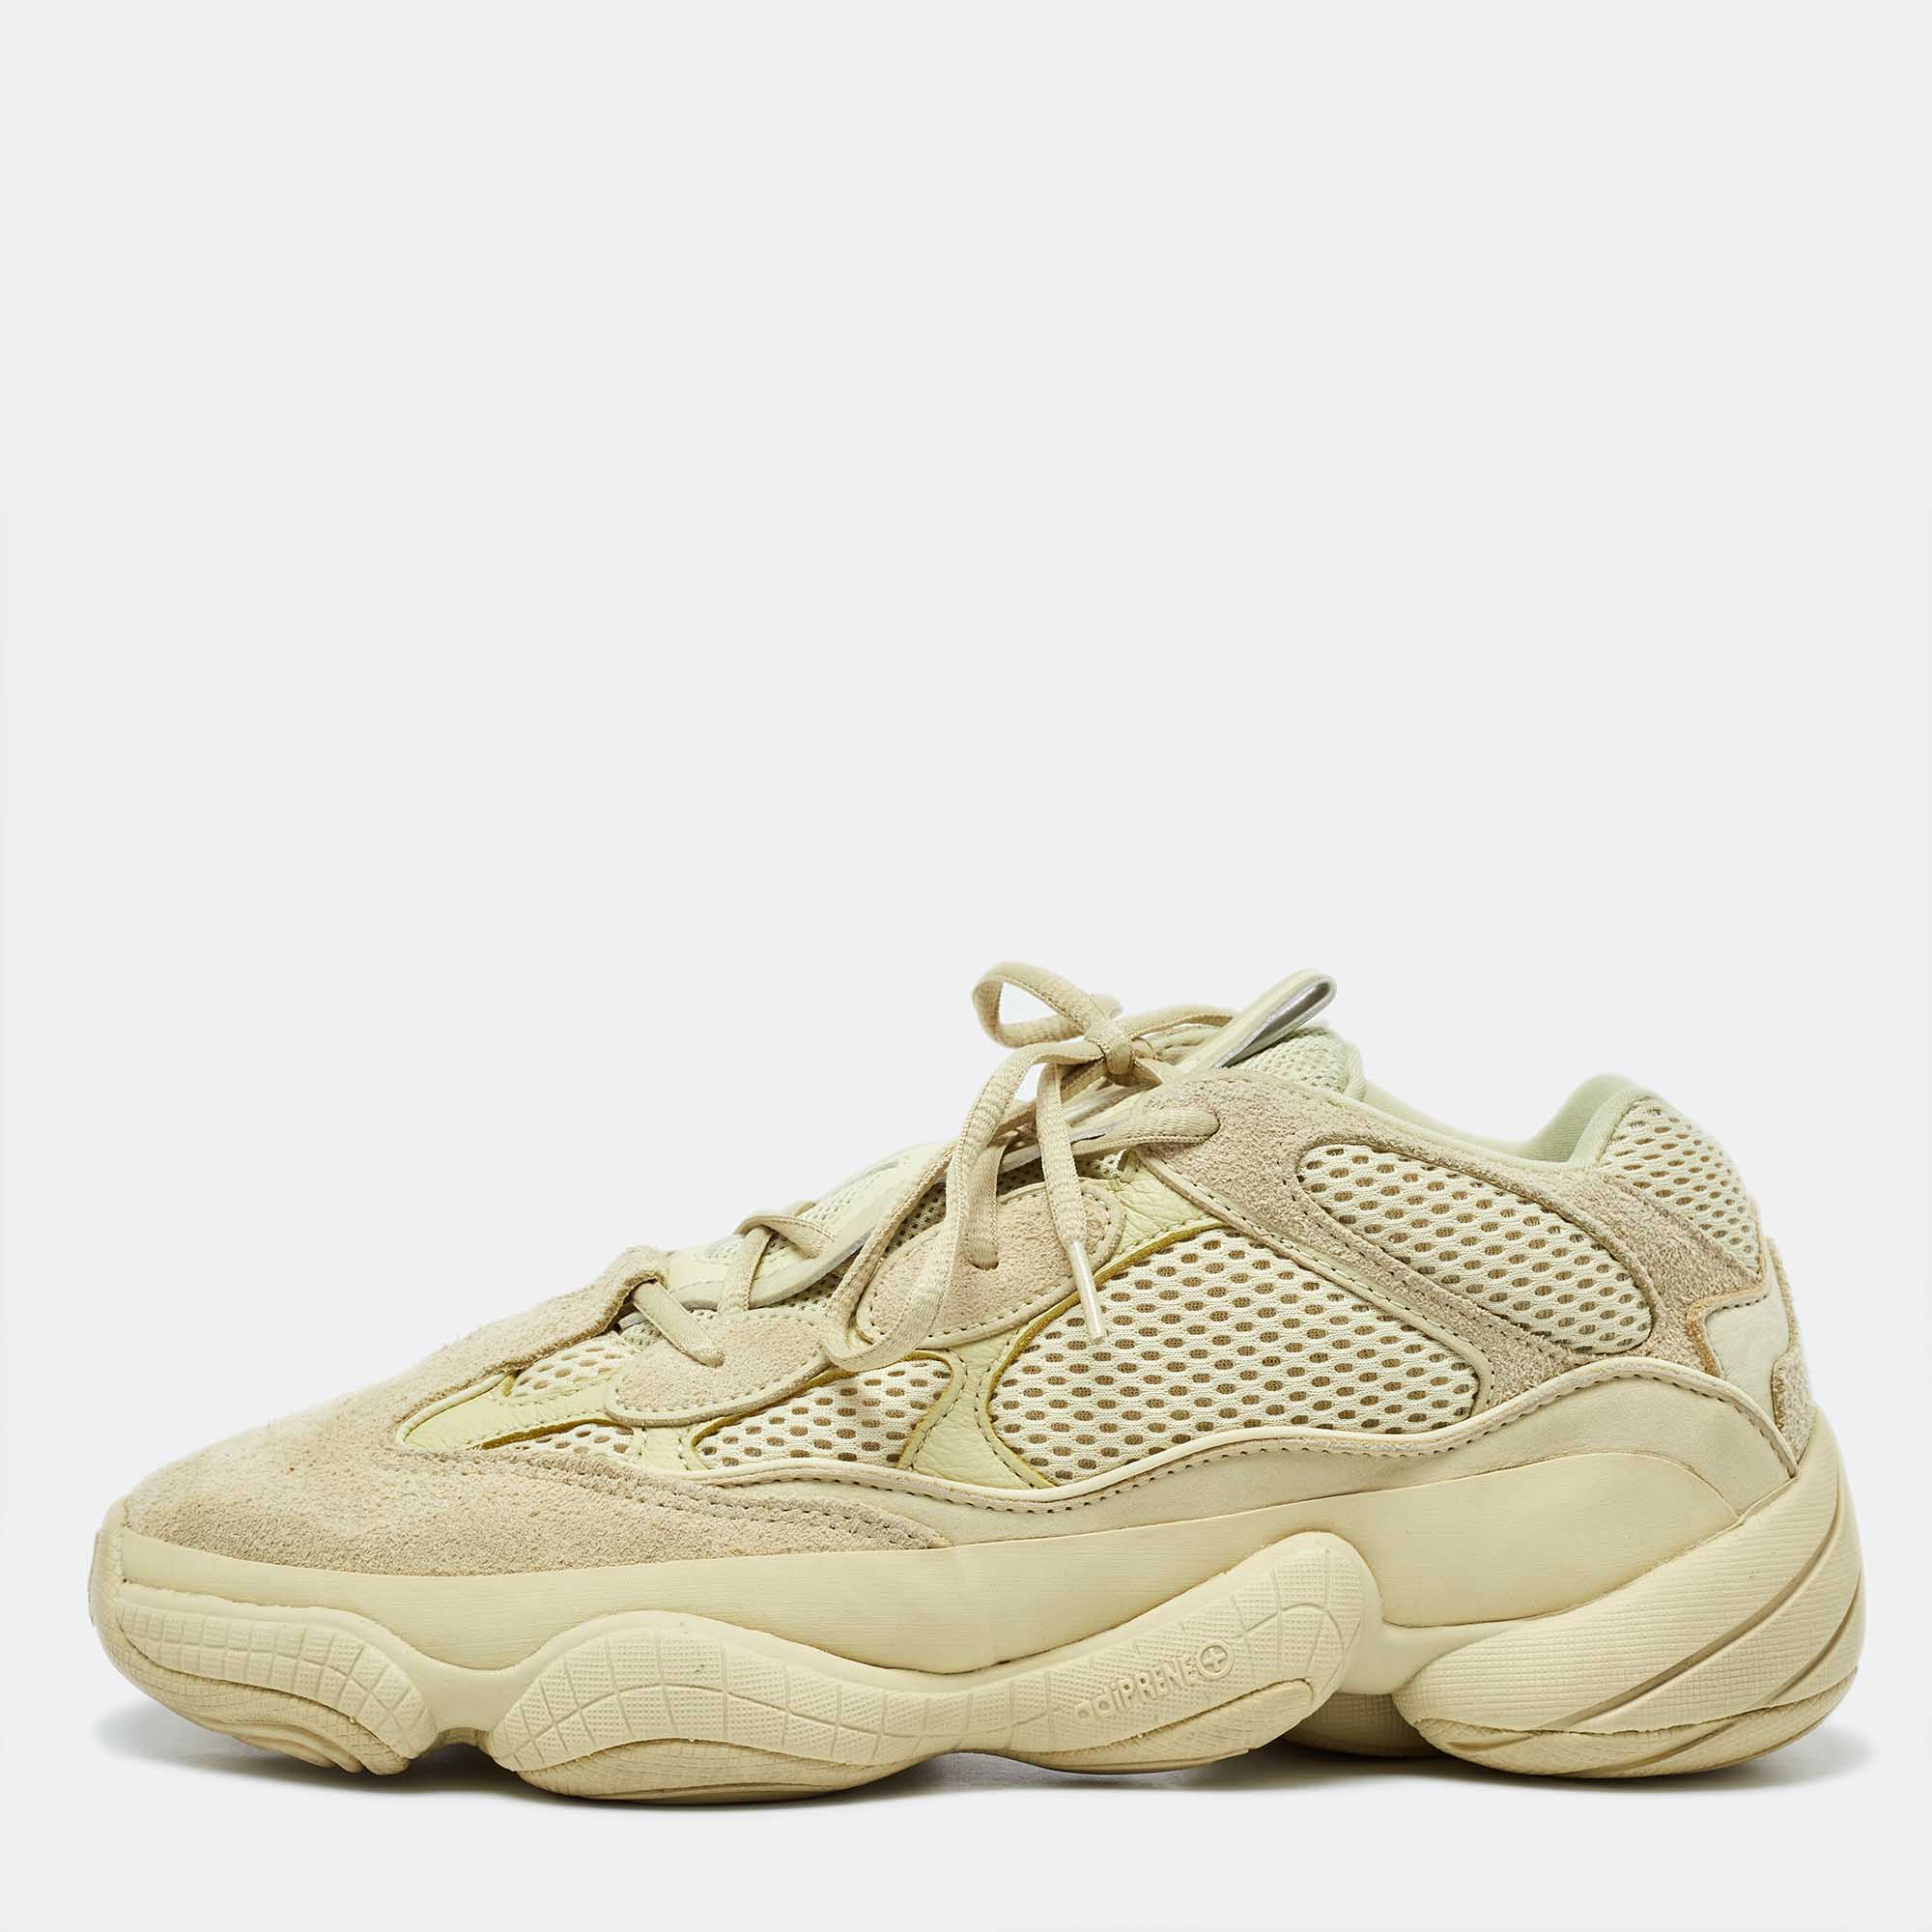 

Yeezy x Adidas Light Yellow Suede and Mesh Yeezy 500 Low Top Sneakers Size, Grey